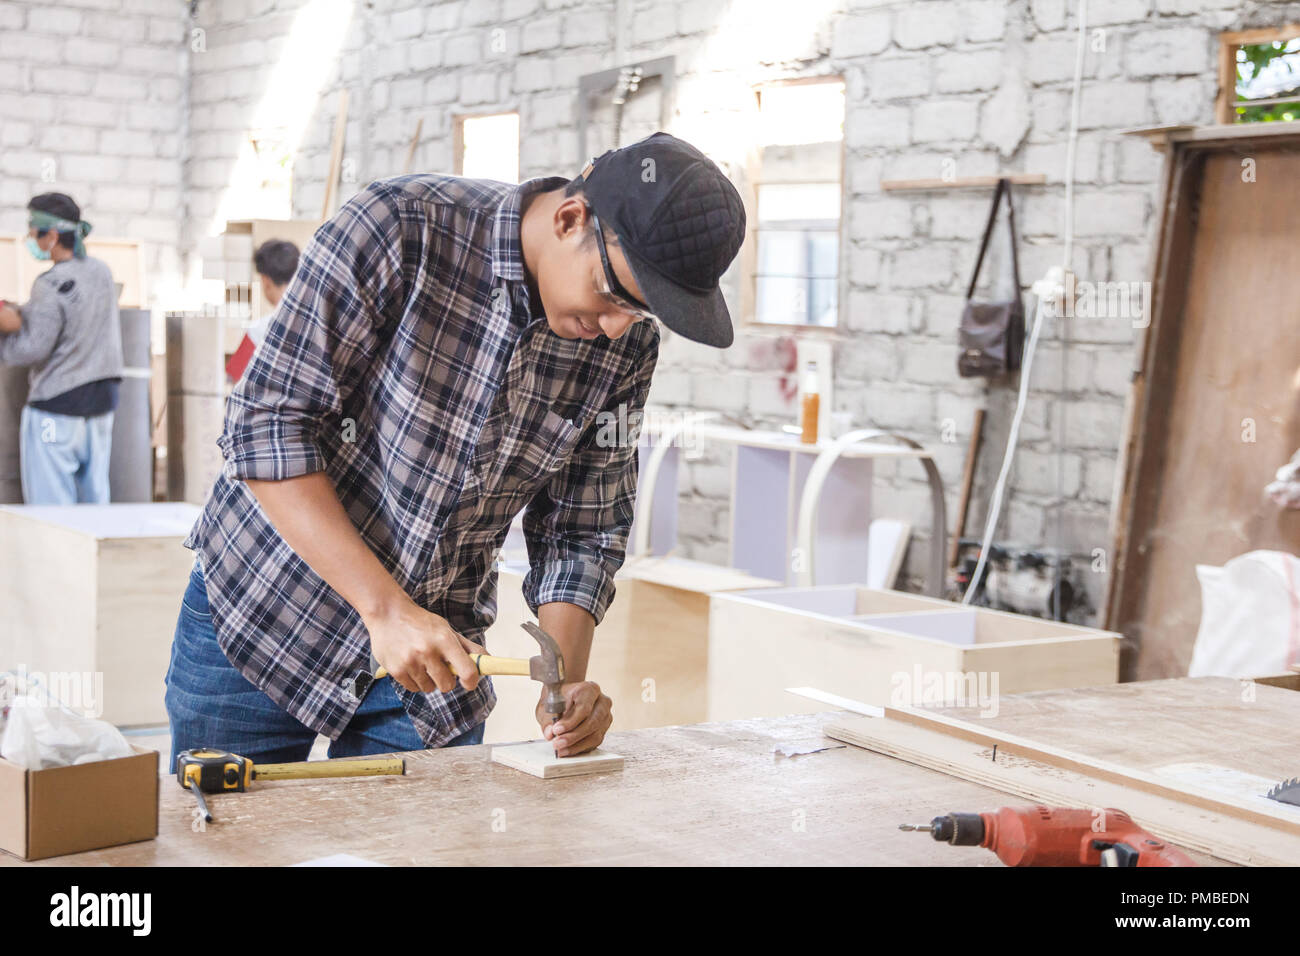 worker at carpenter workspace installing nail using hammer Stock Photo